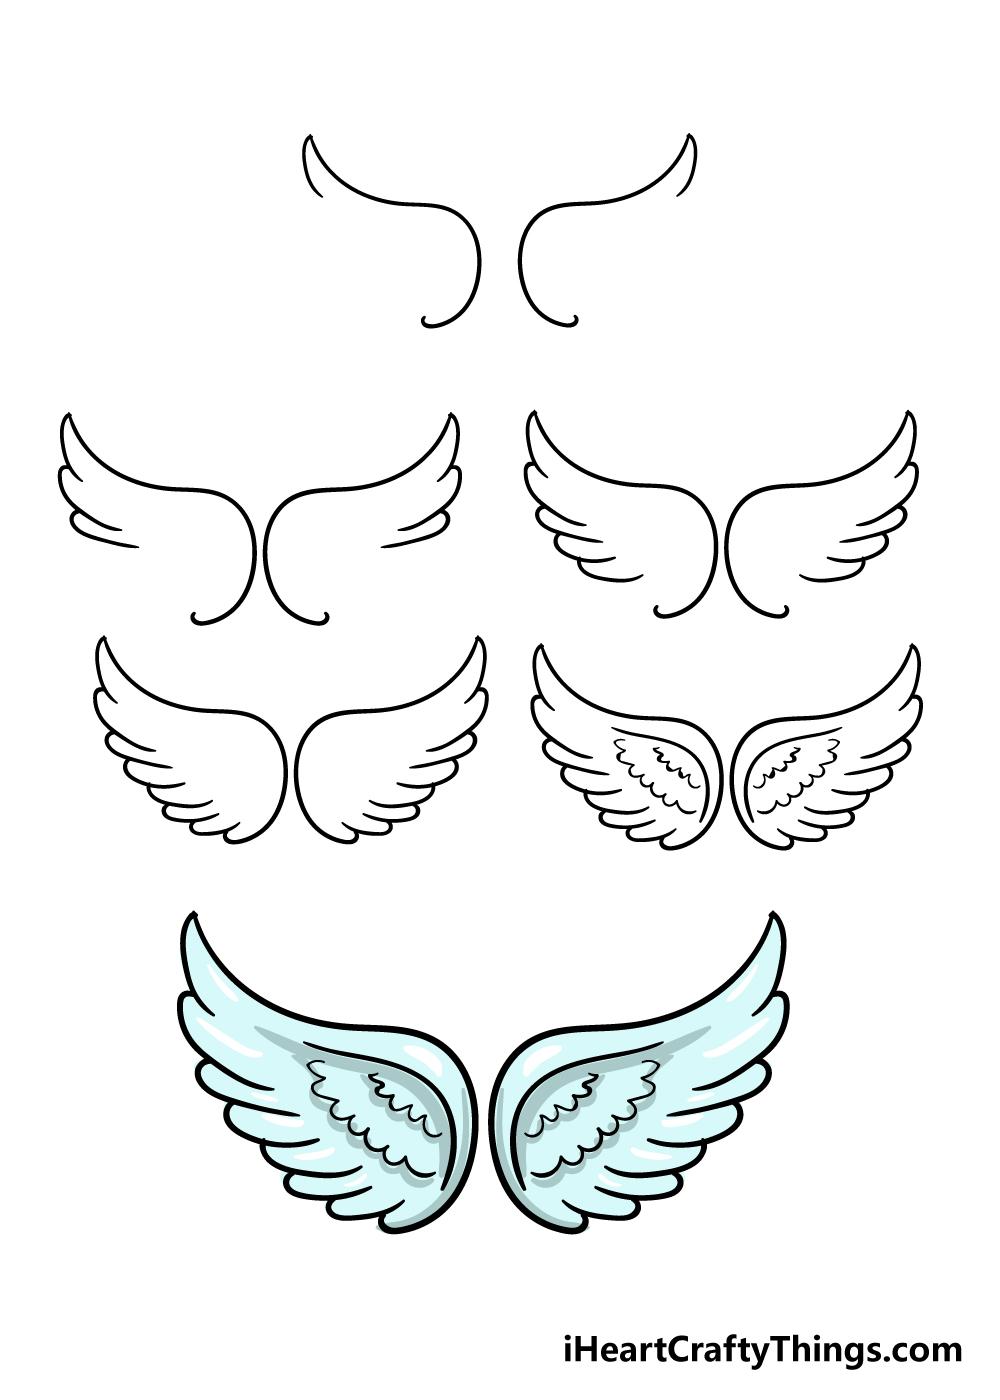 Detail Angel Wings Easy To Draw Nomer 2